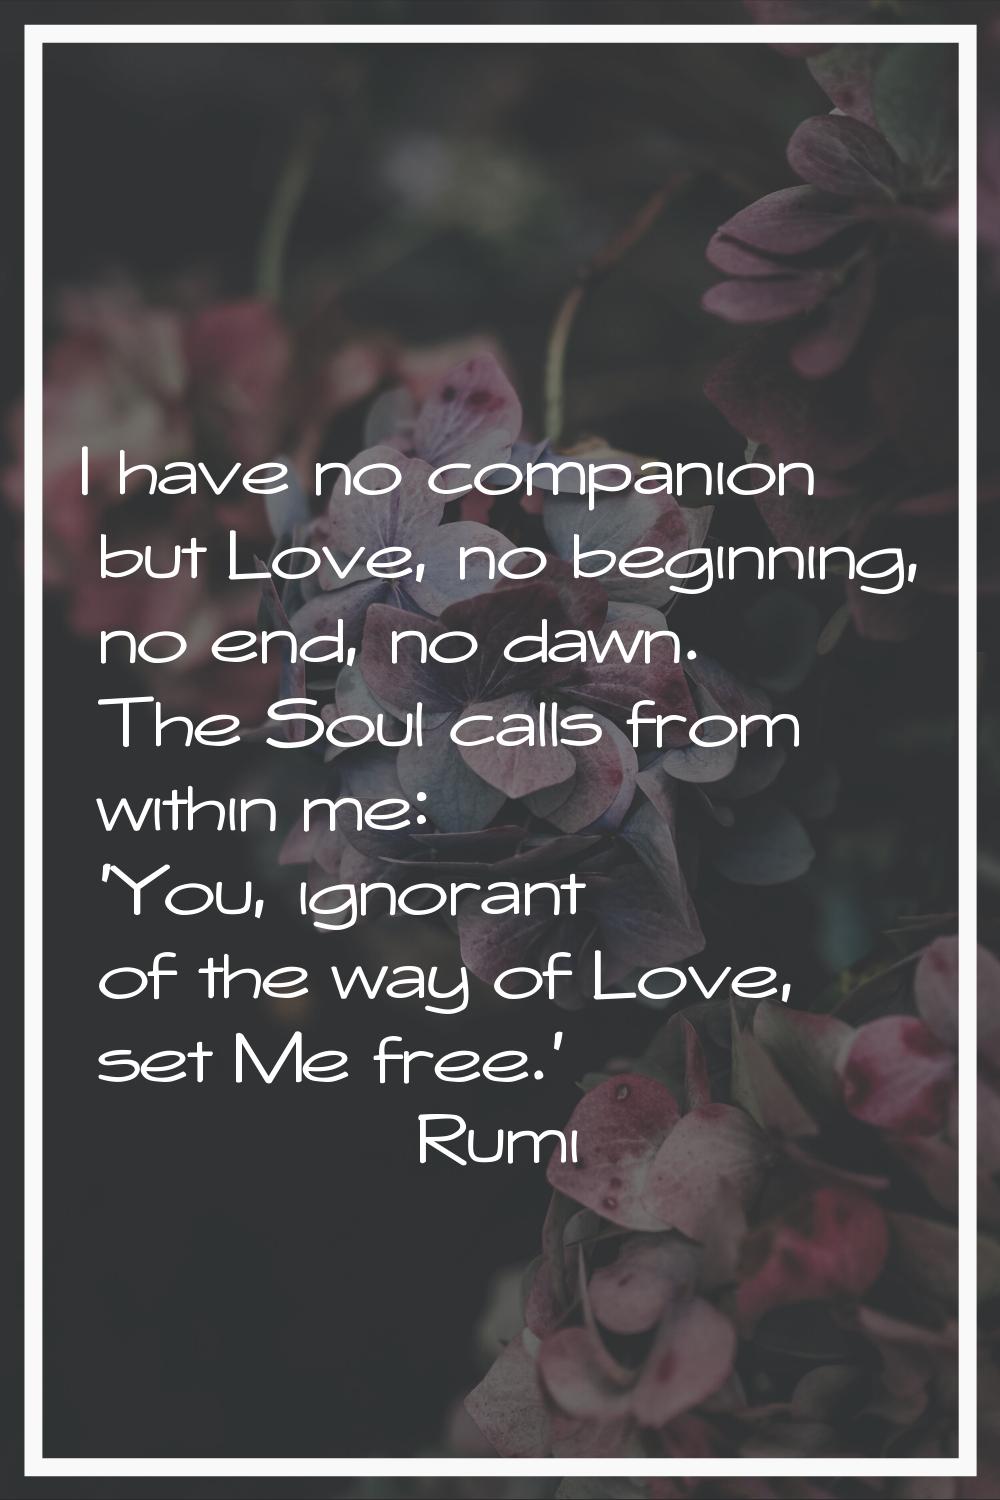 I have no companion but Love, no beginning, no end, no dawn. The Soul calls from within me: 'You, i